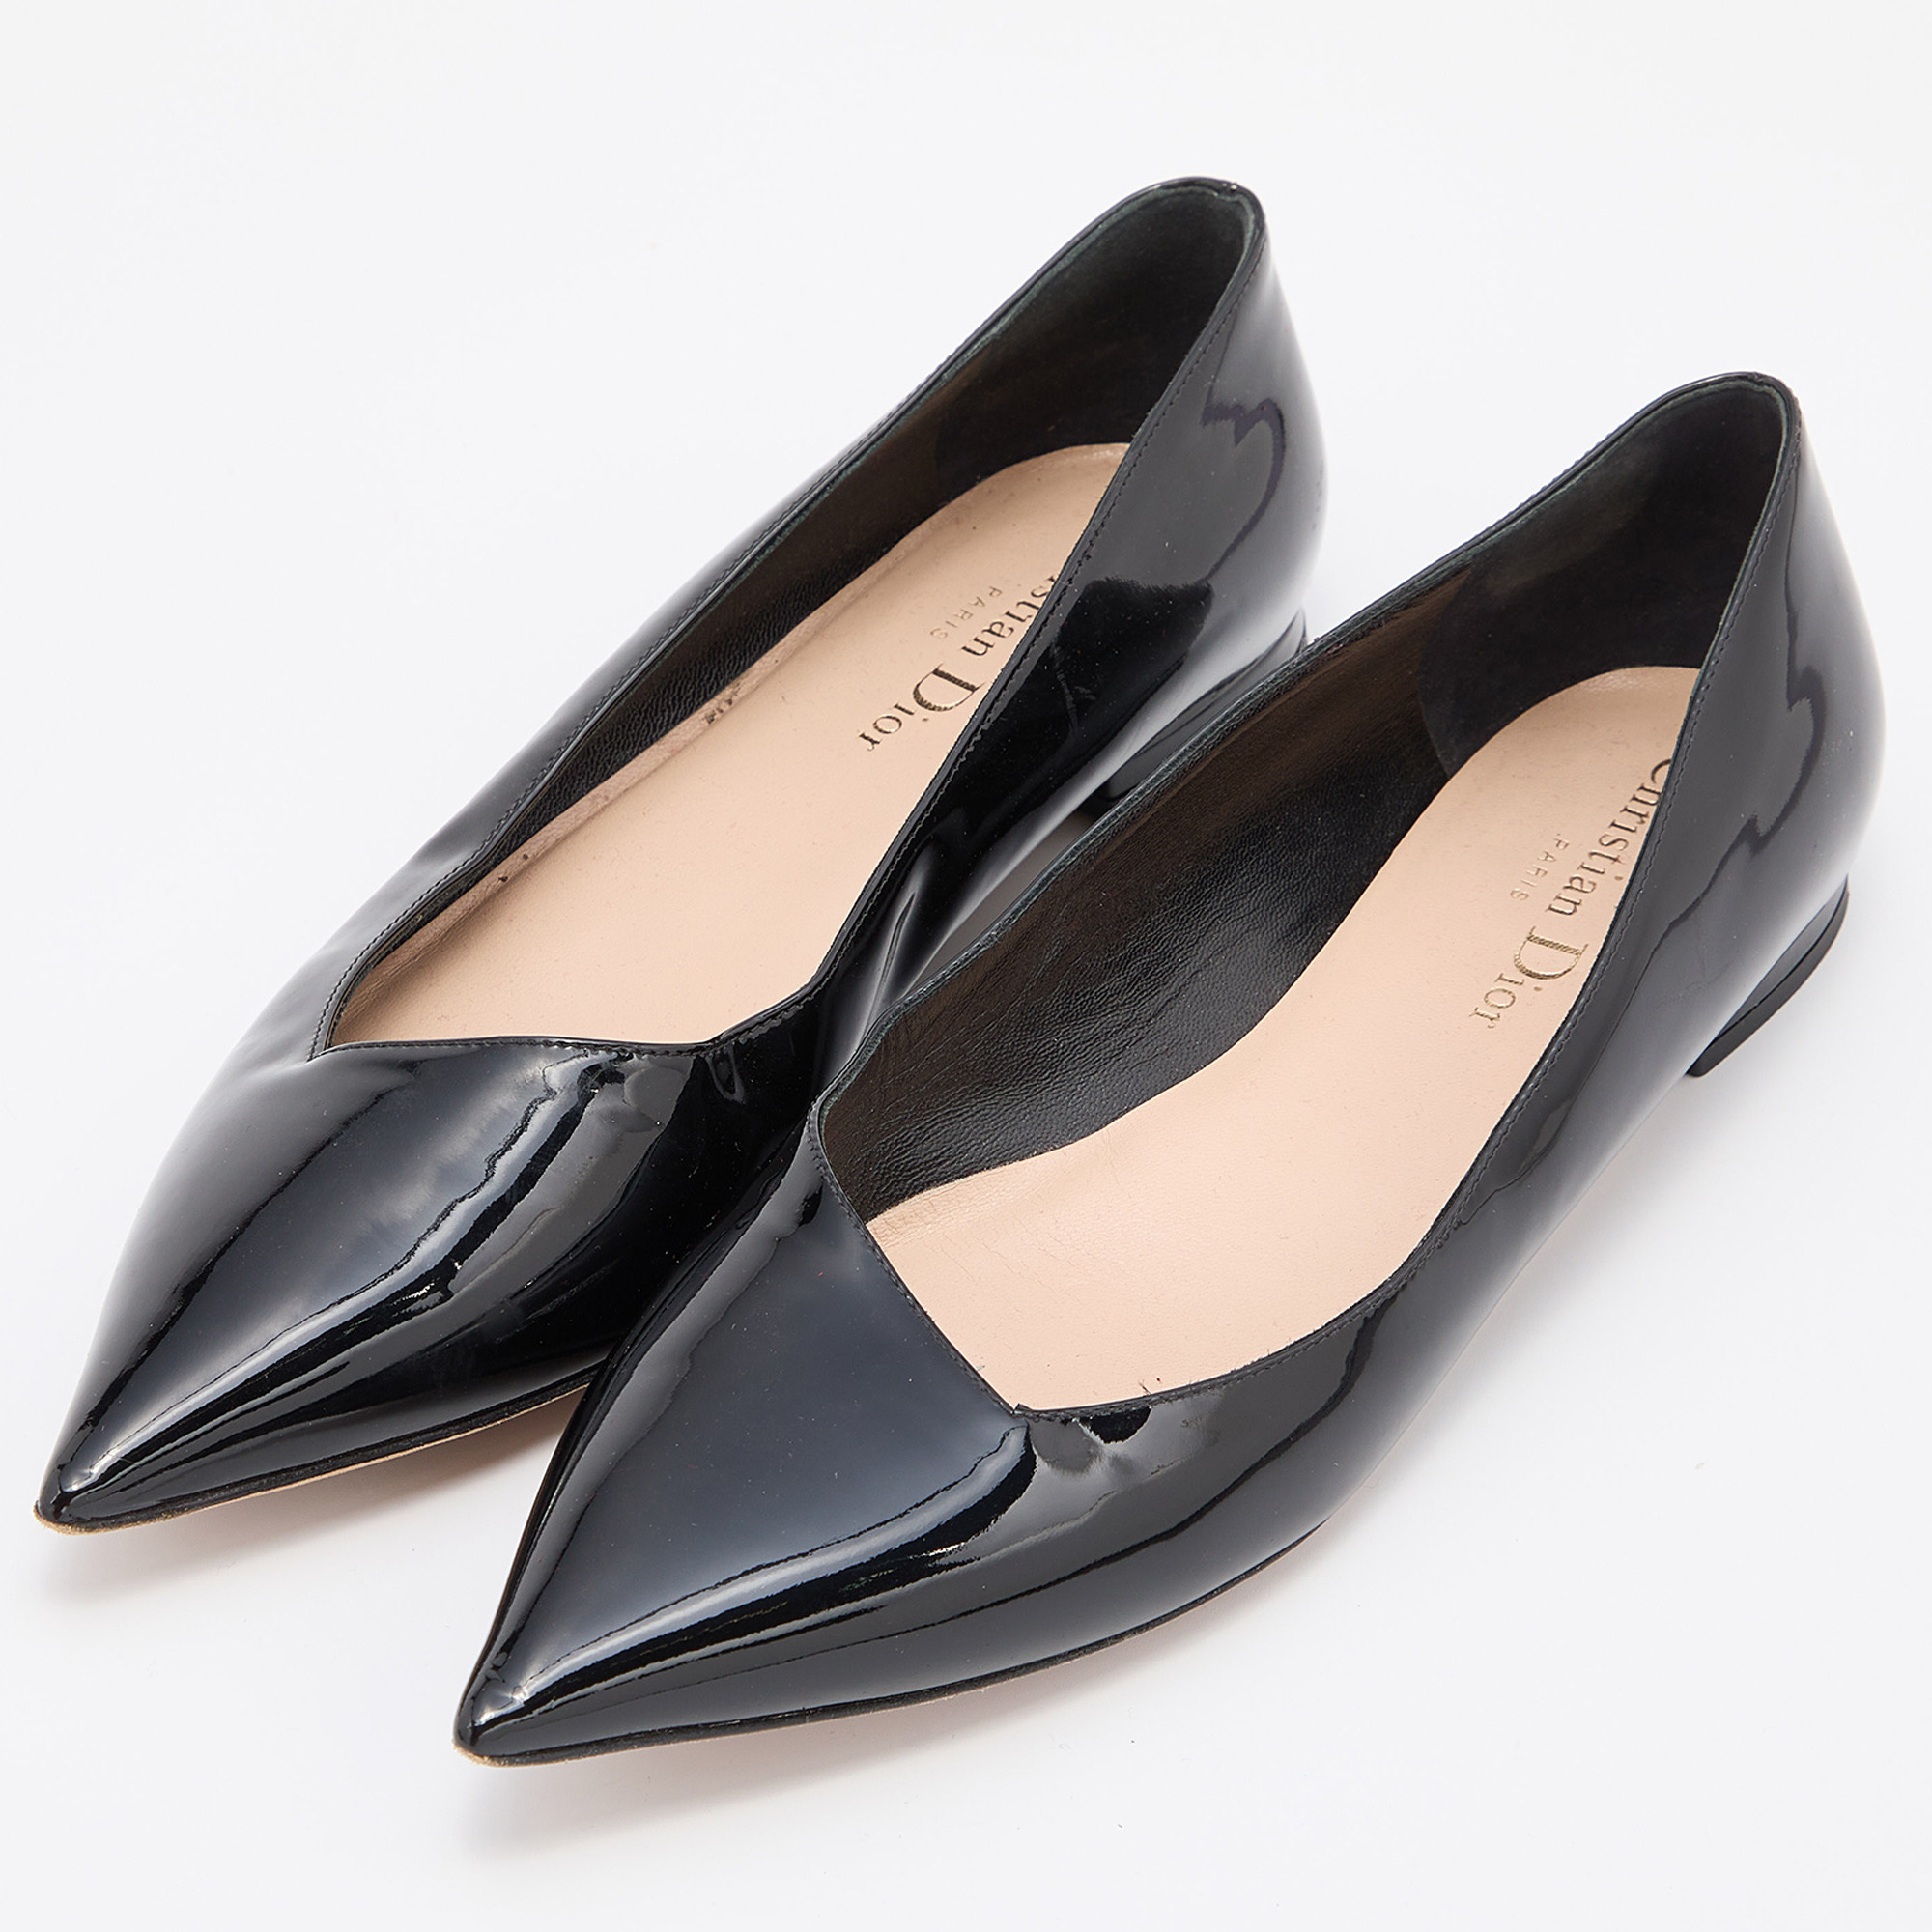 

Dior Black Patent Leather Pointed Toe Ballet Flats Size